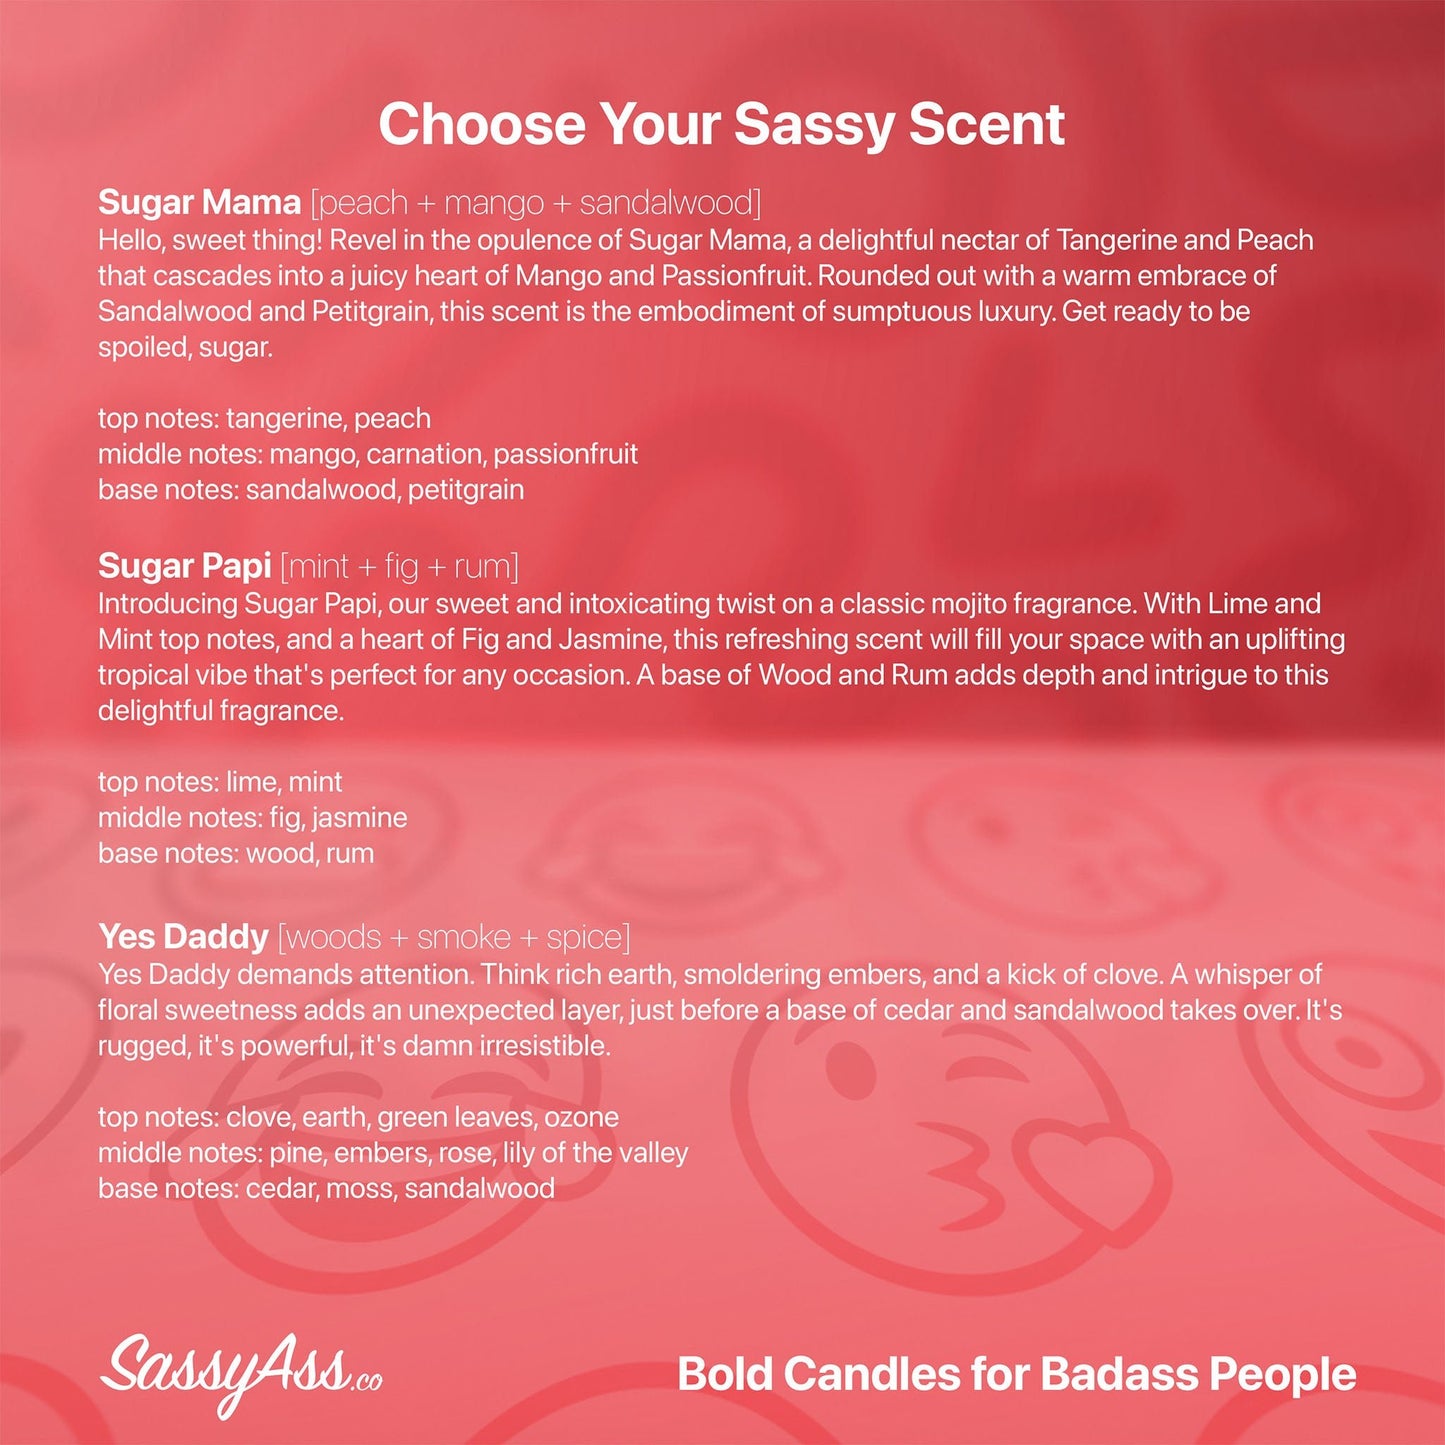 Badass Mommabear - LGBTQ Pride Scented Soy Candle, Handcrafted, Vegan, Cruelty-Free, Eco-Friendly, Unique Gift, Mother's Day, Empowering - a red background with a text description for a product - SassyAss.co